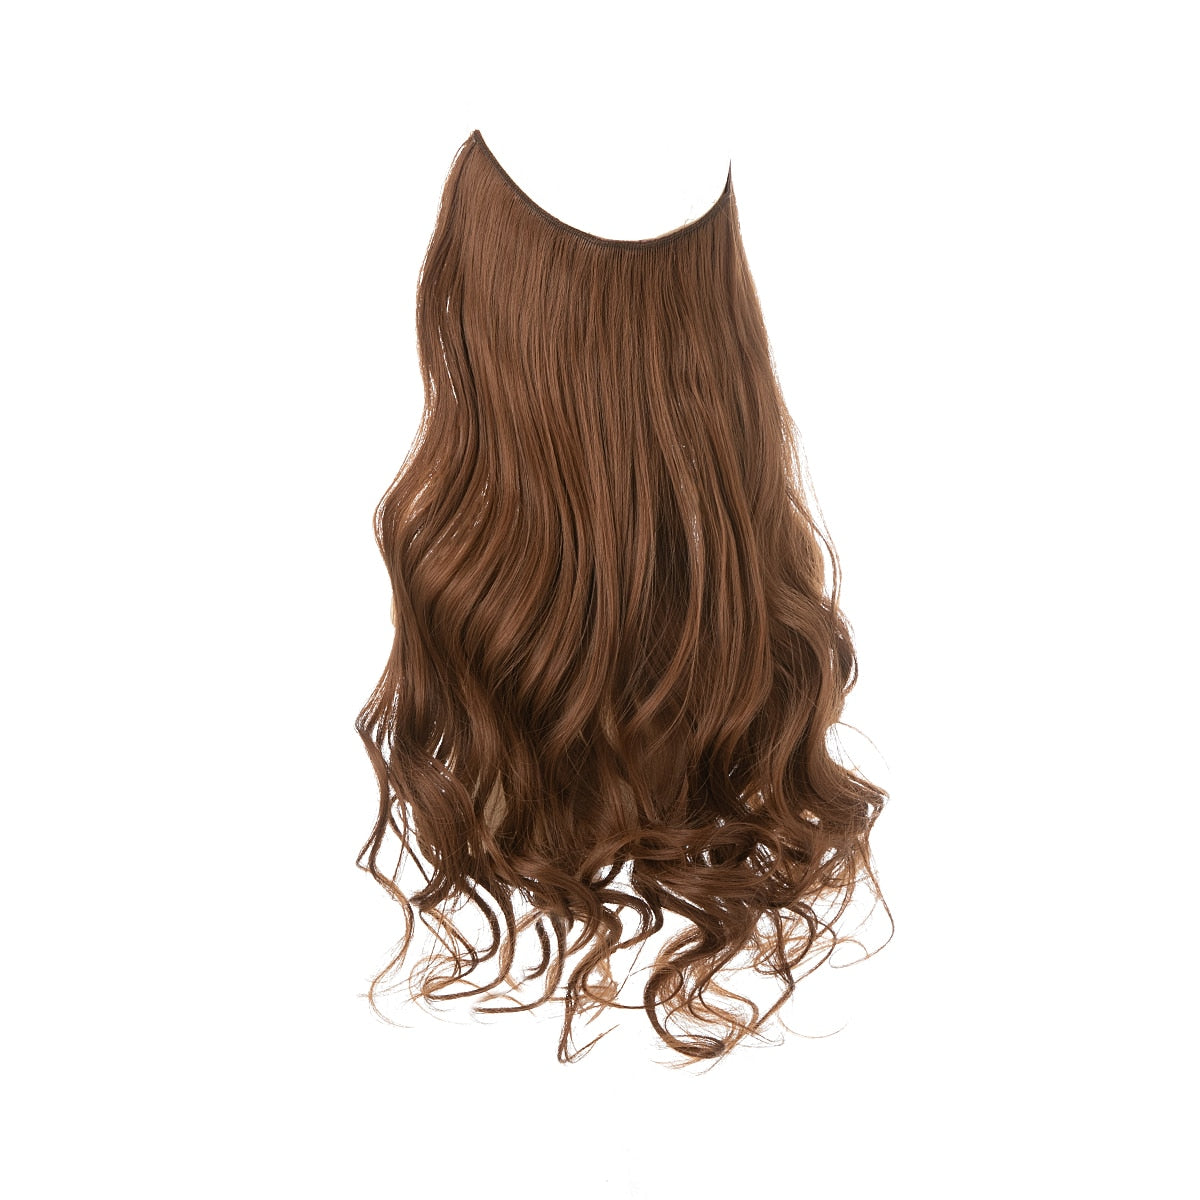 TEEK - Invisible Synth No Clip No Comb Wave Hair Extensions | Dark Varieties HAIR theteekdotcom Light Golden Brown 14inches 